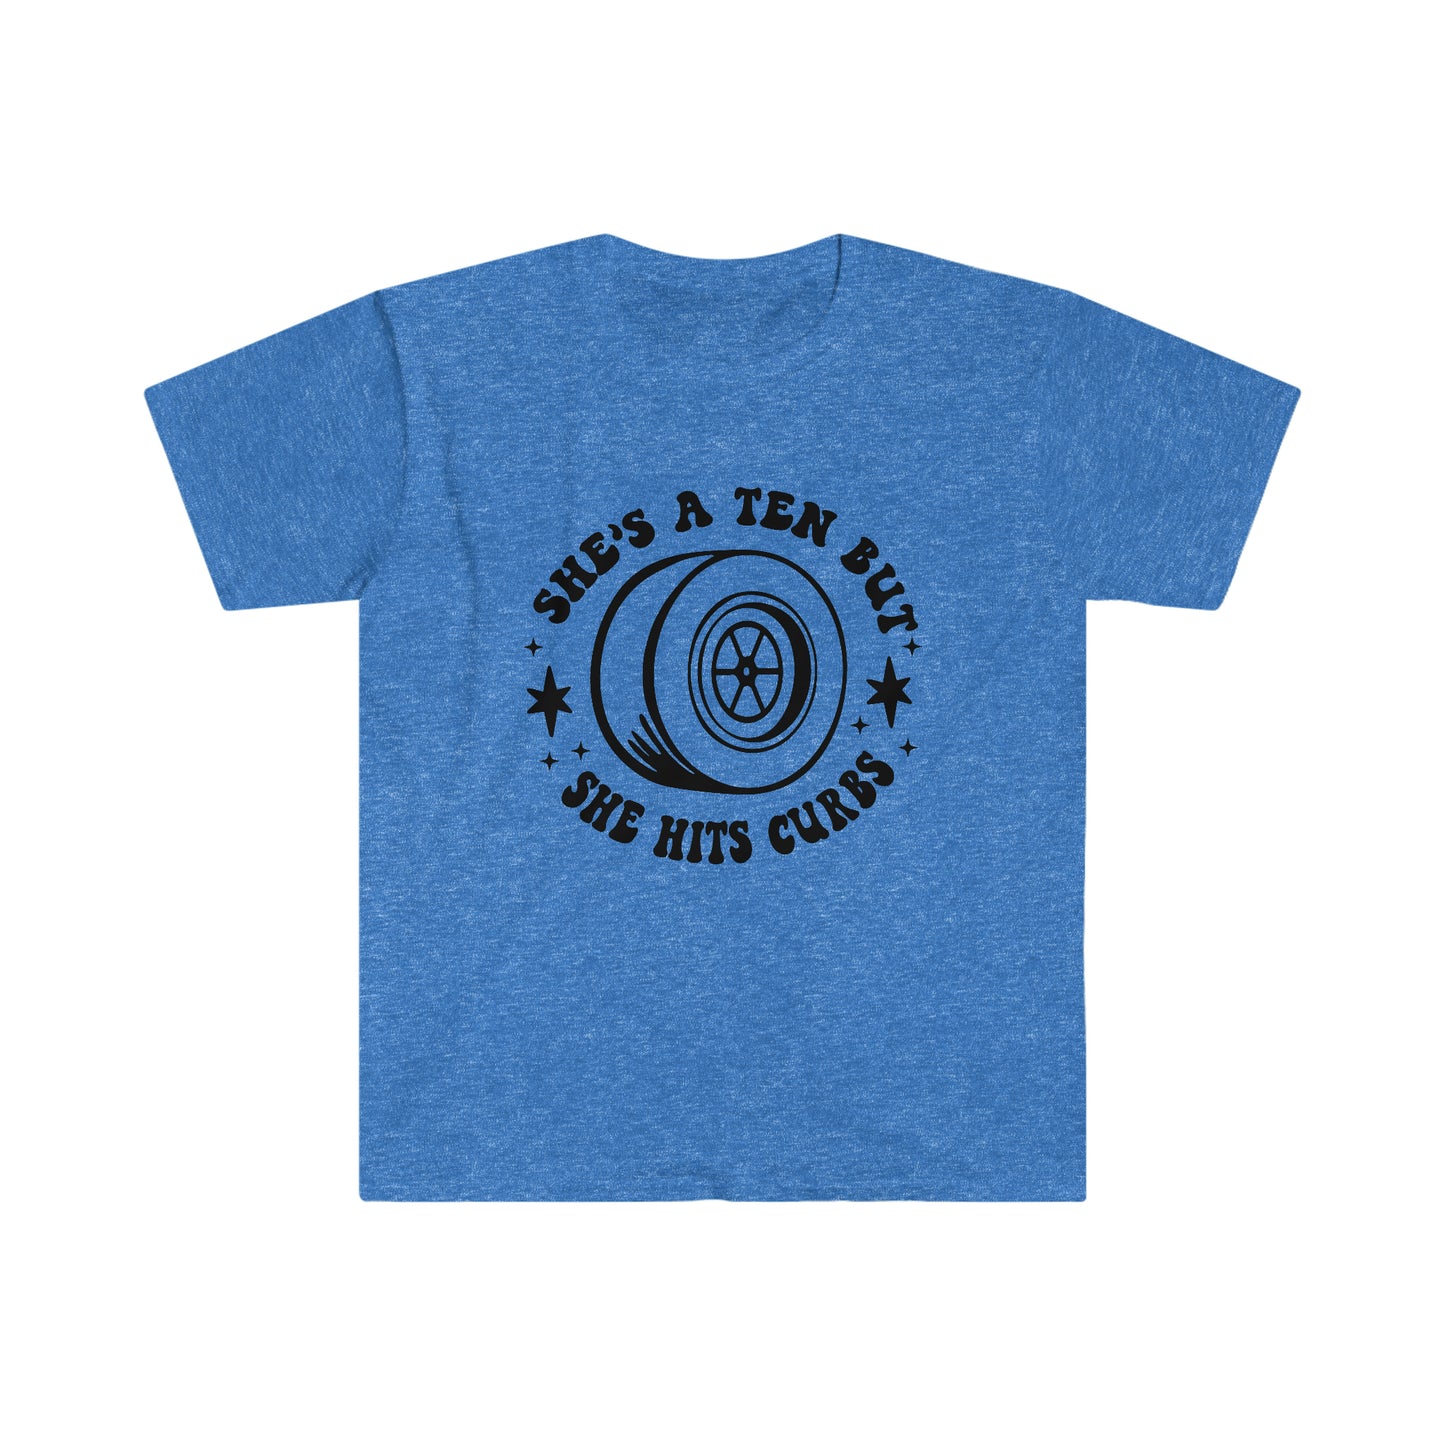 "She's a ten, but she hits curbs" Unisex Softstyle T-Shirt